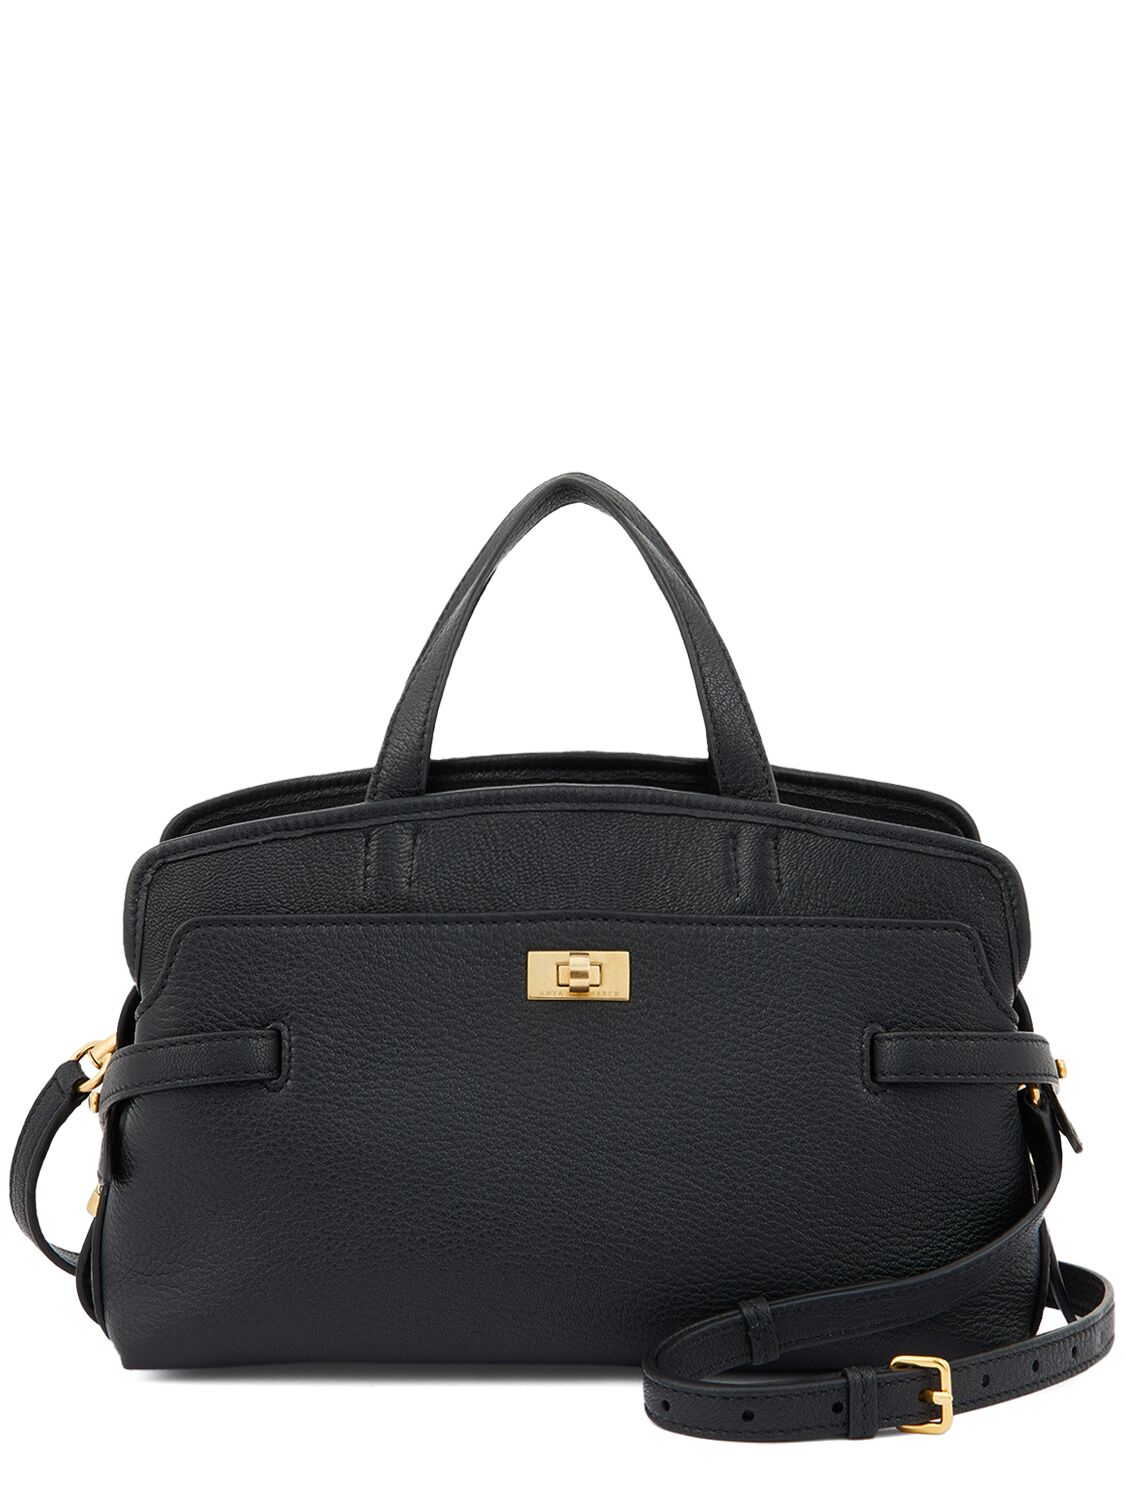 Anya Hindmarch Small Wilson Grain Leather Tote Bag In Black